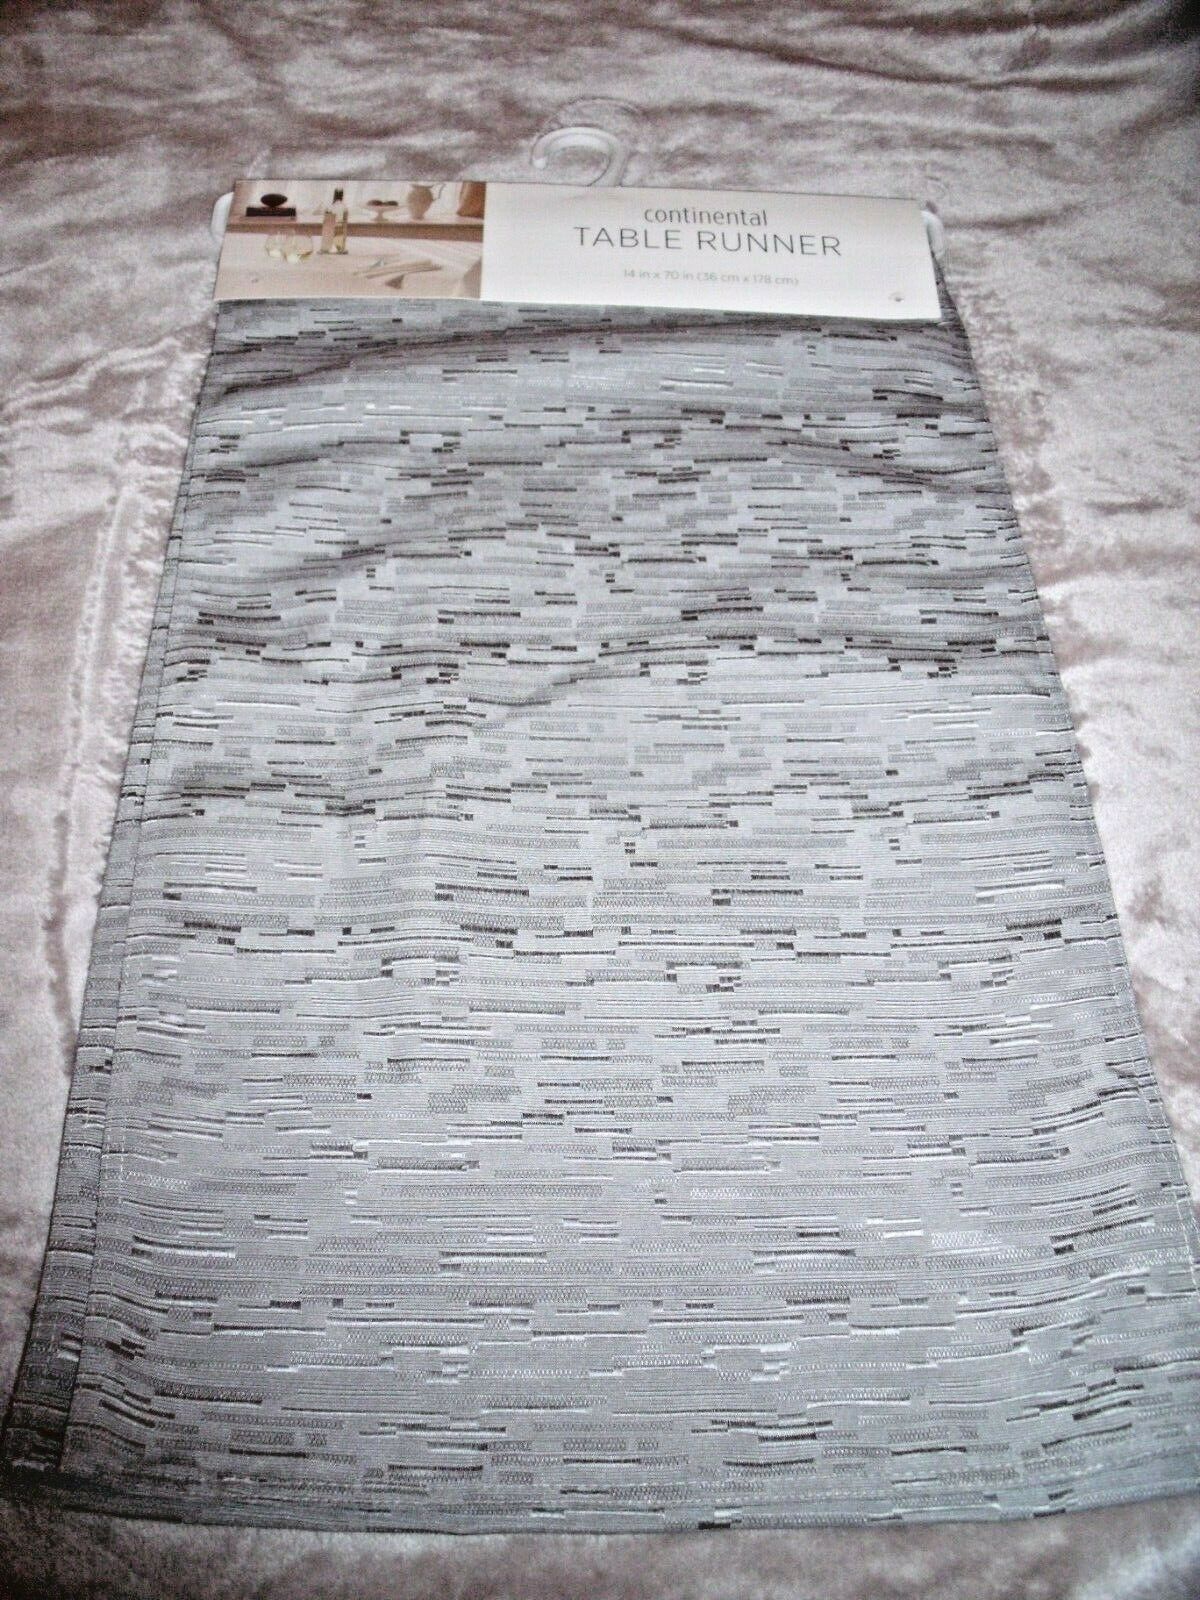 NEW Continental Gray TABLE RUNNER 14" X 70" Fabric $40 retail reversible - $24.95